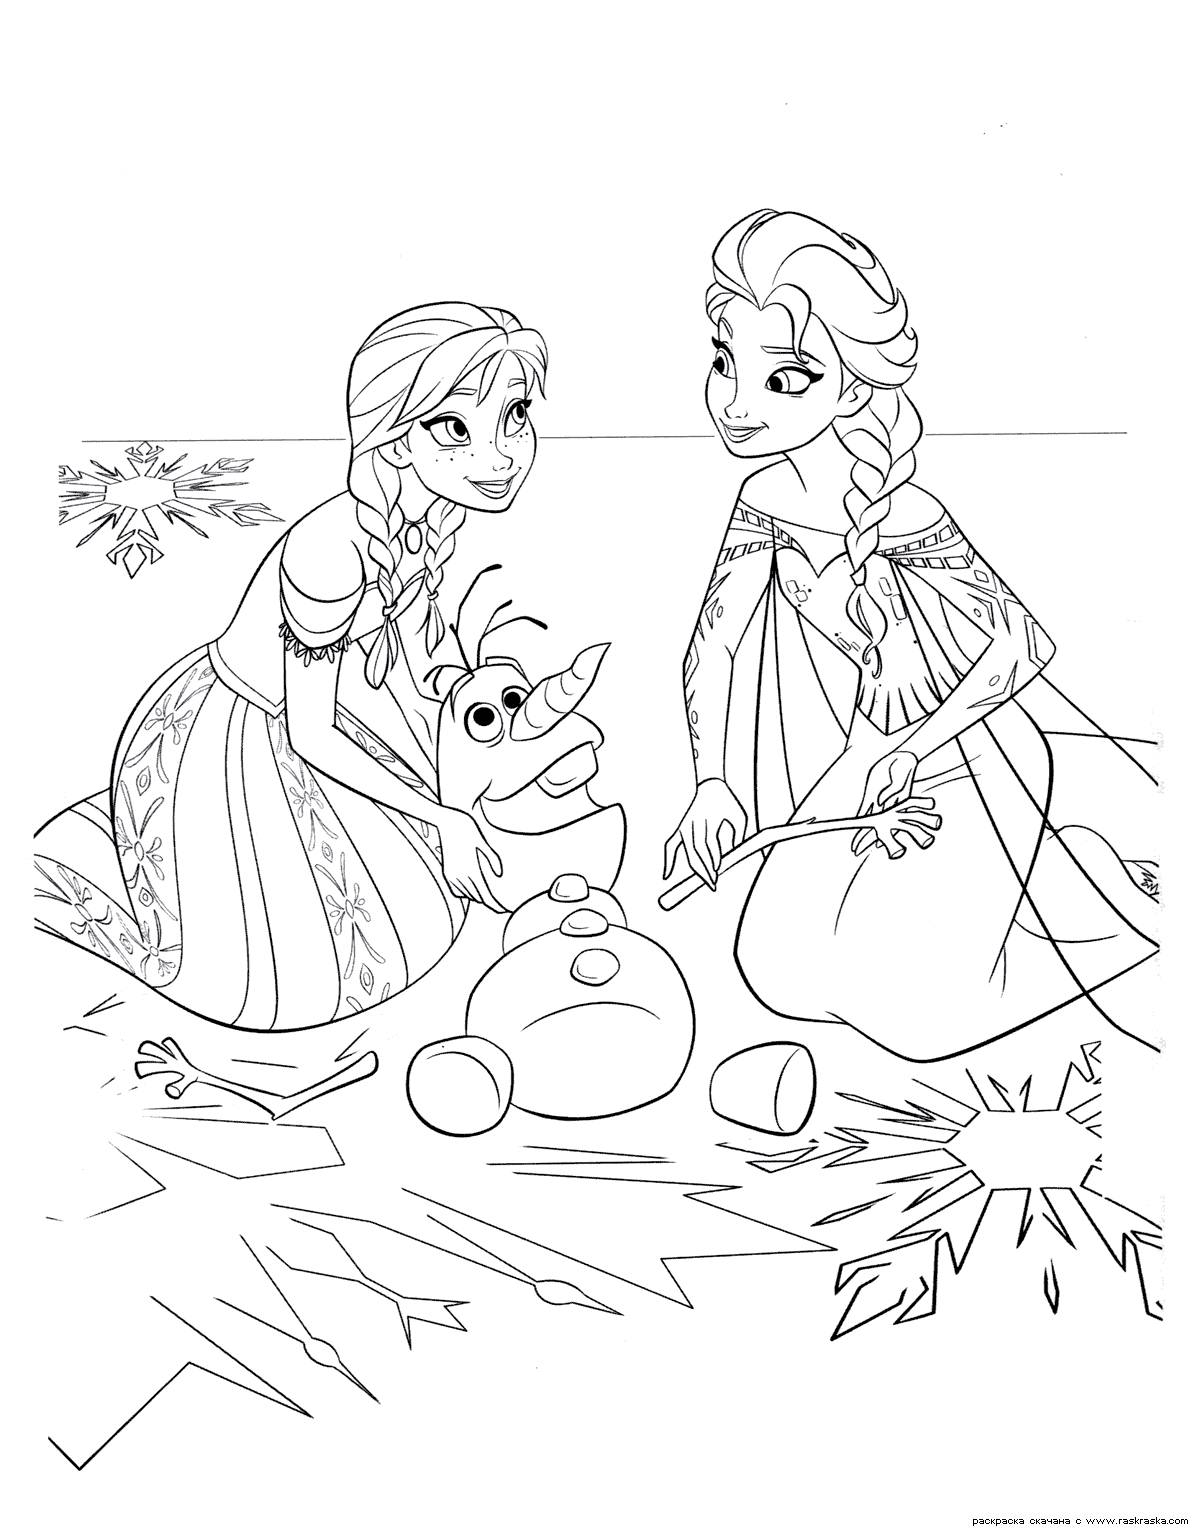 Coloring page frozen cute snowman with princesses